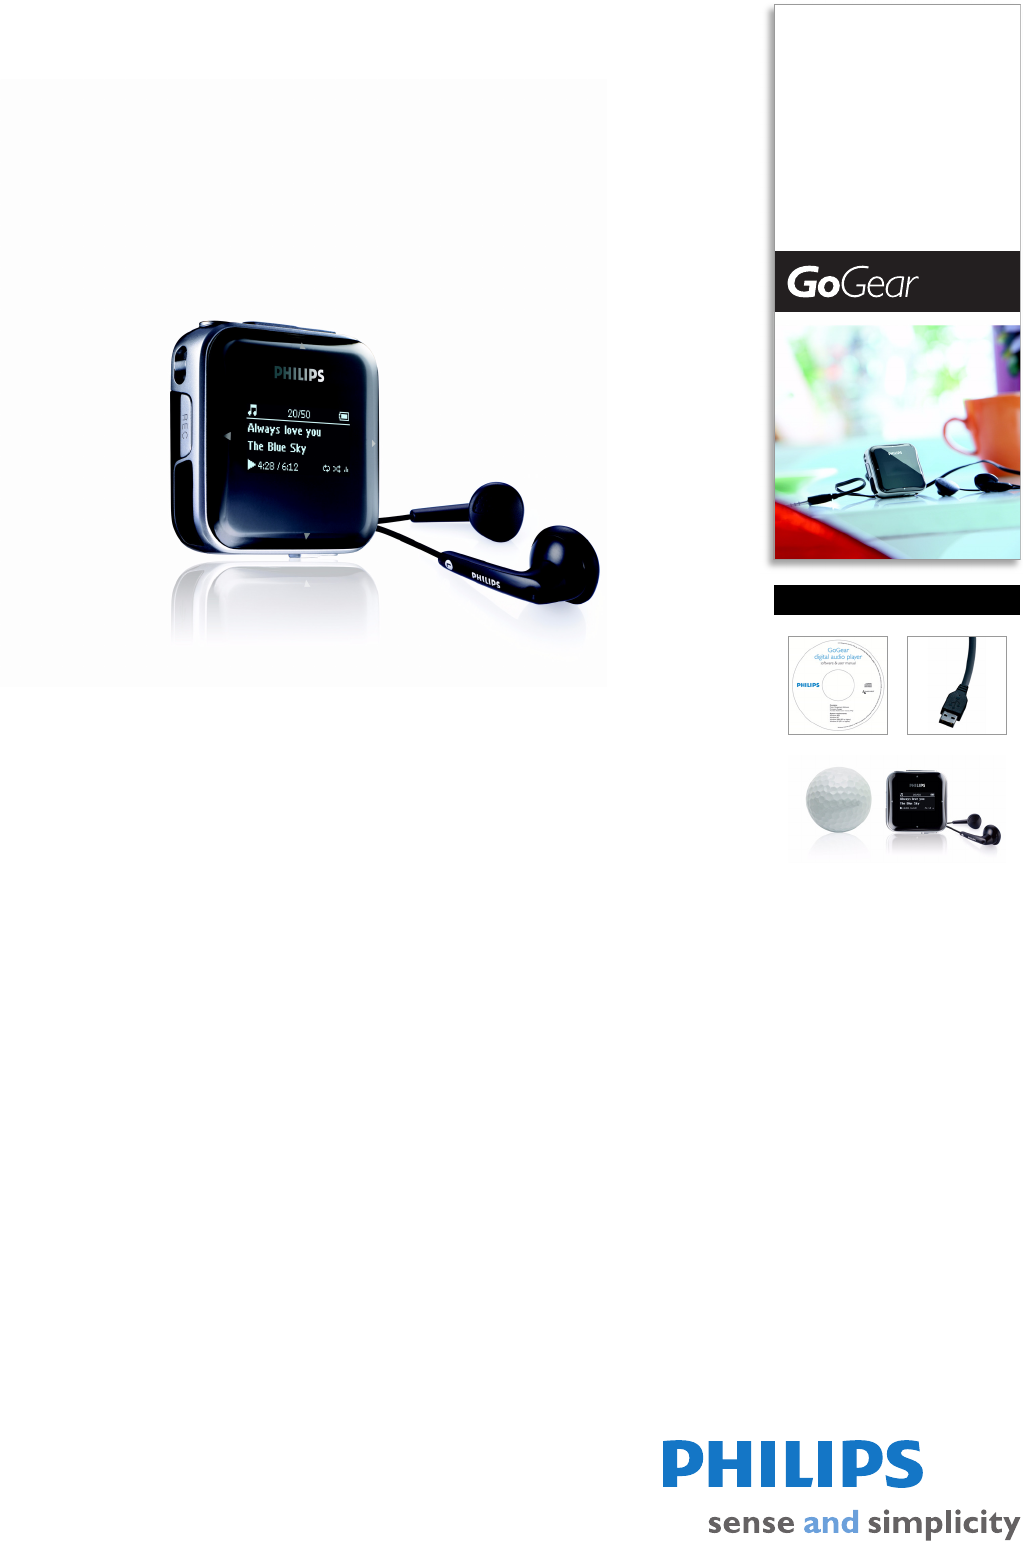 manual philips gogear mp3 player